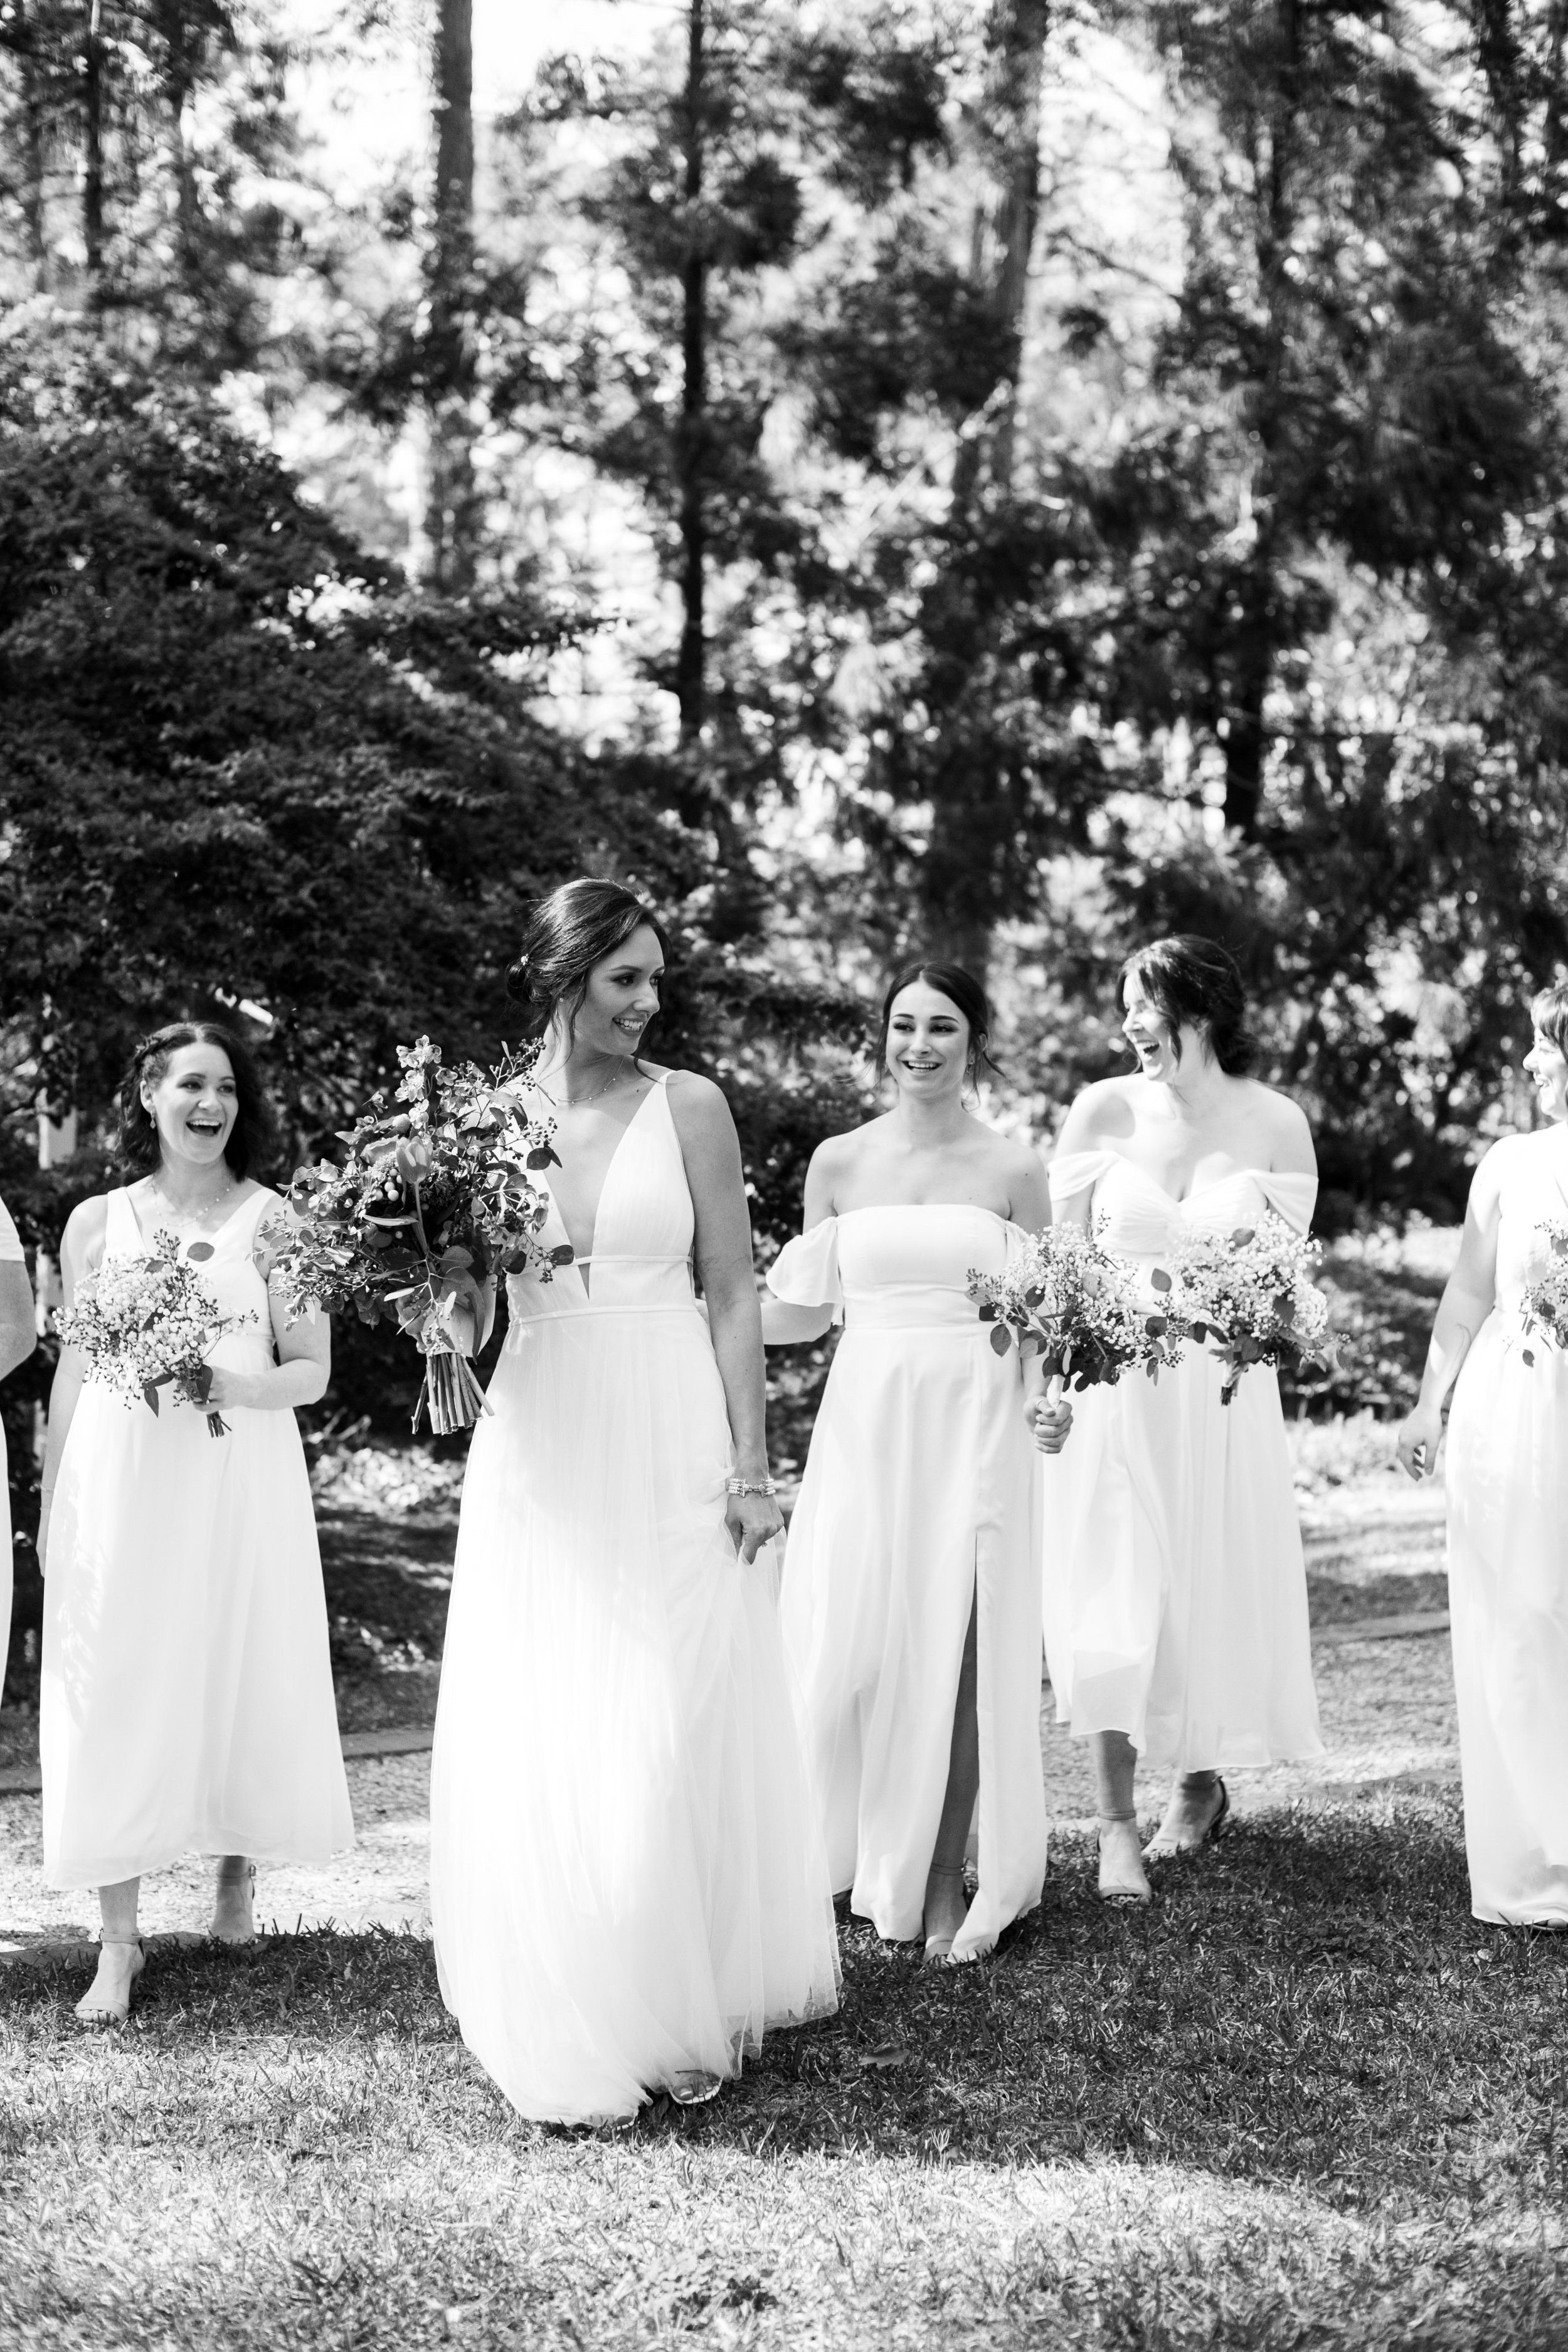  Black and white image of bride and bridesmaids in all-white dresses walking in Cape Fear Botanical Garden wedding venue.  